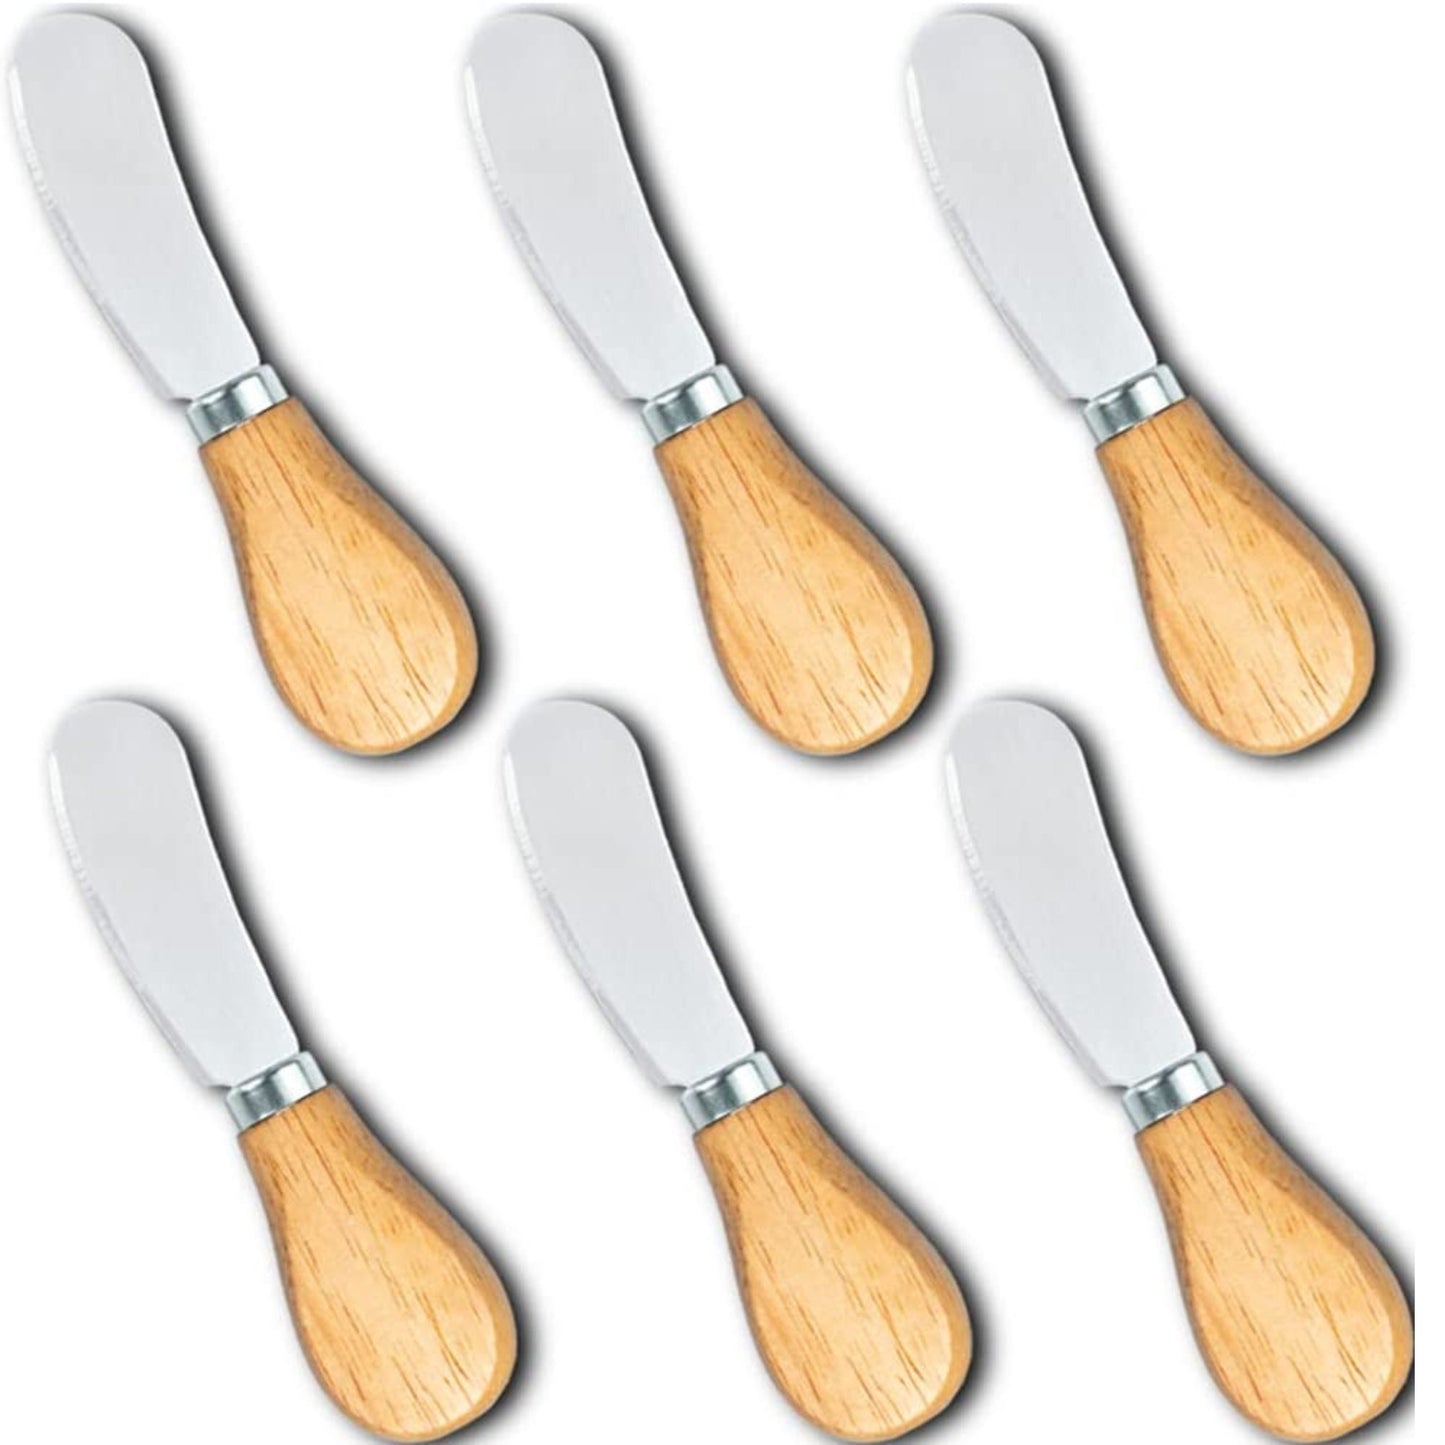 Stainless Steel Mini Cheese Knife Set for Charcuterie Board